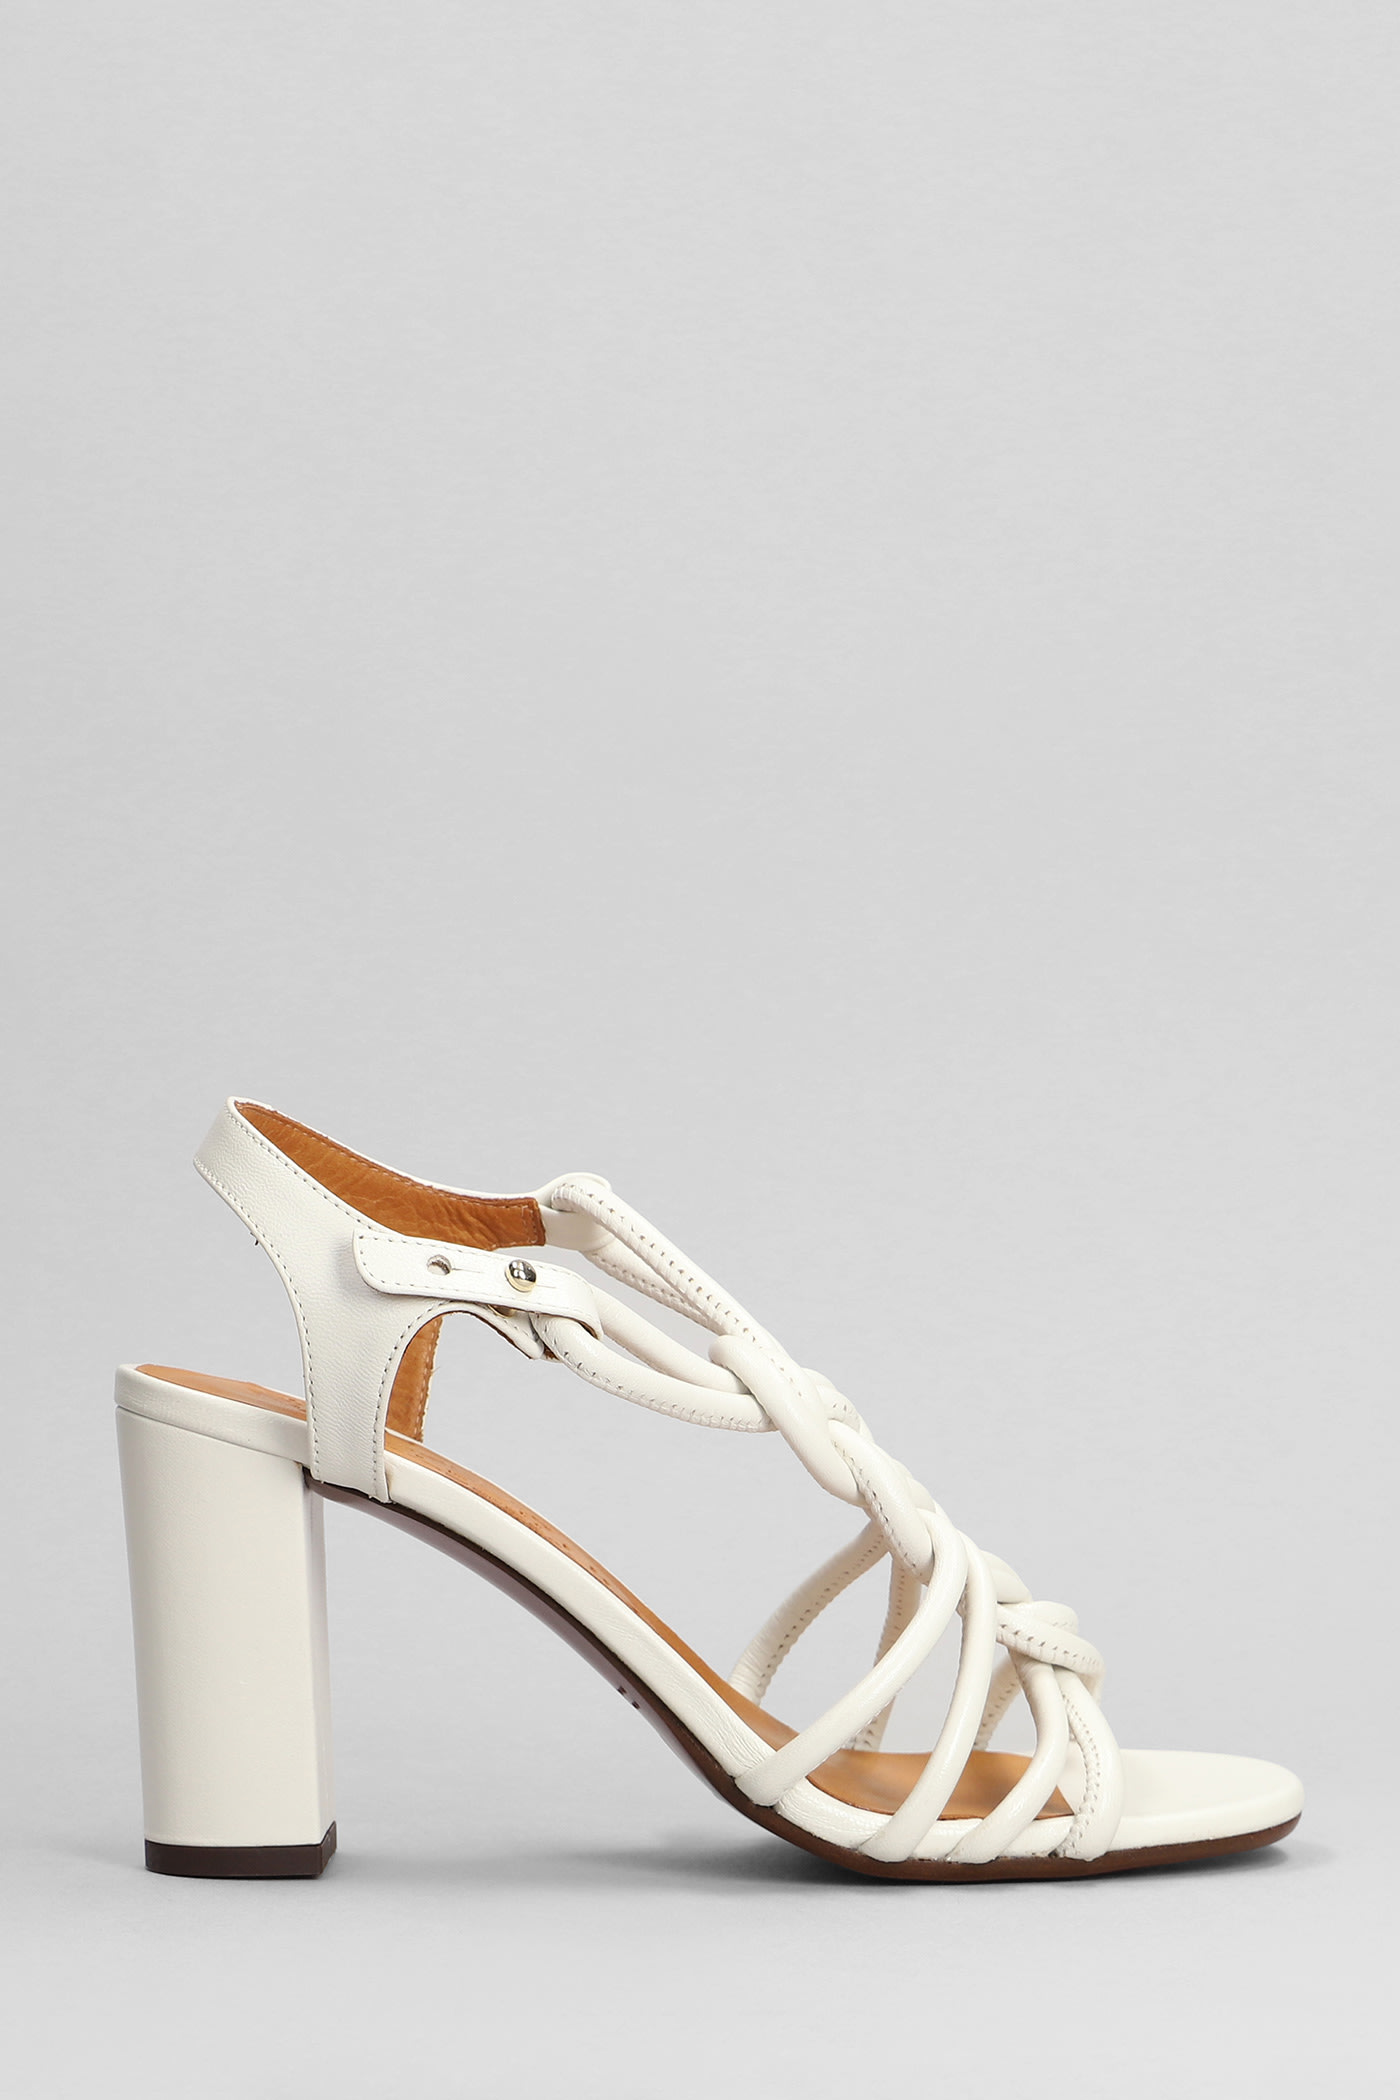 Shop Chie Mihara Bane Sandals In White Leather